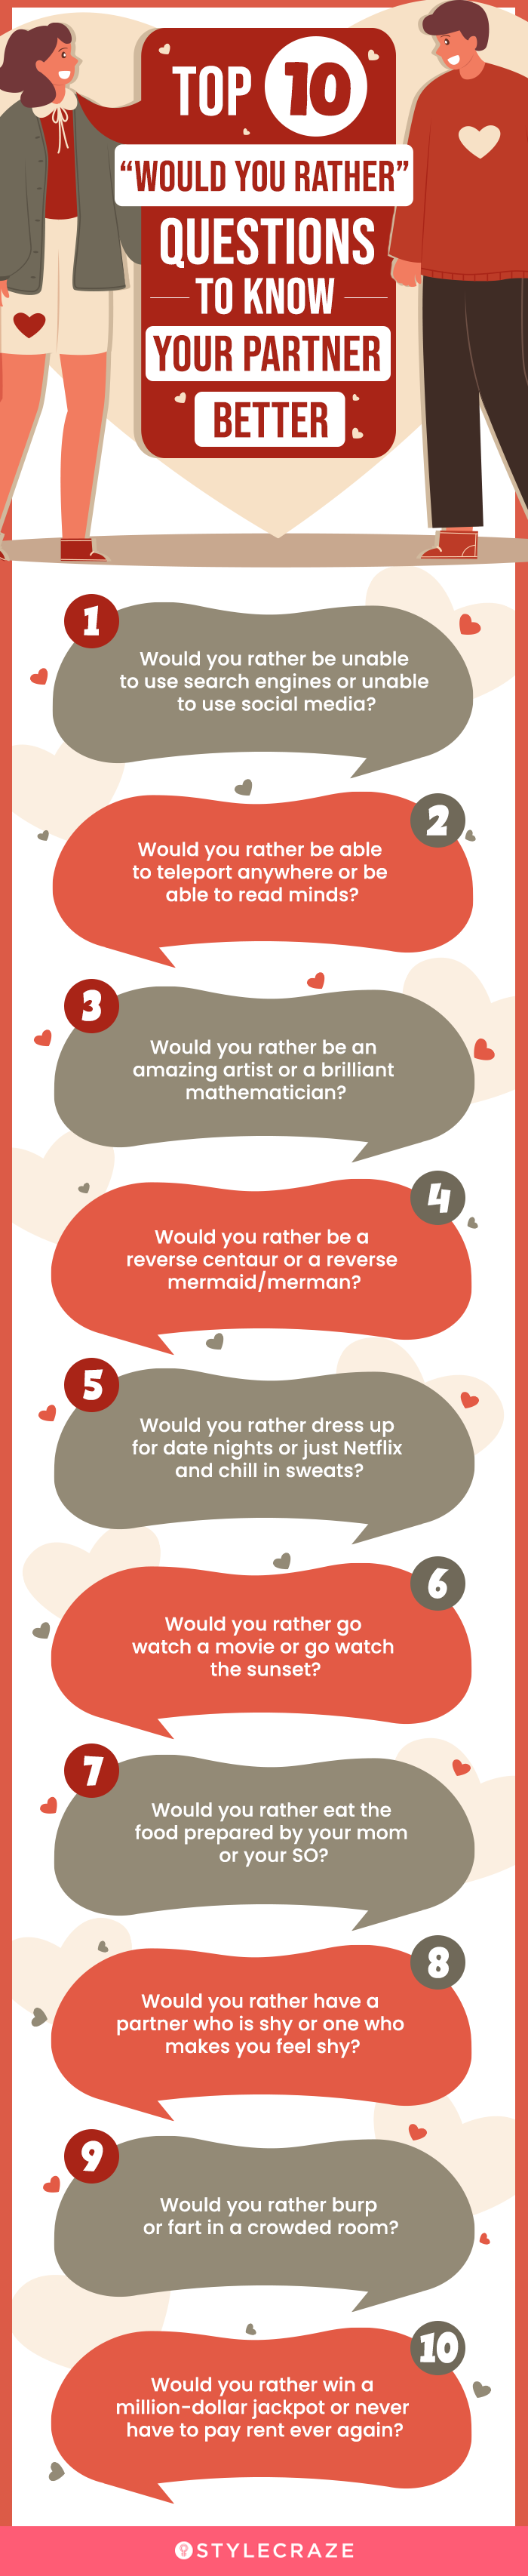 top 10 “would you rather” questions to know your partner better (infographic)